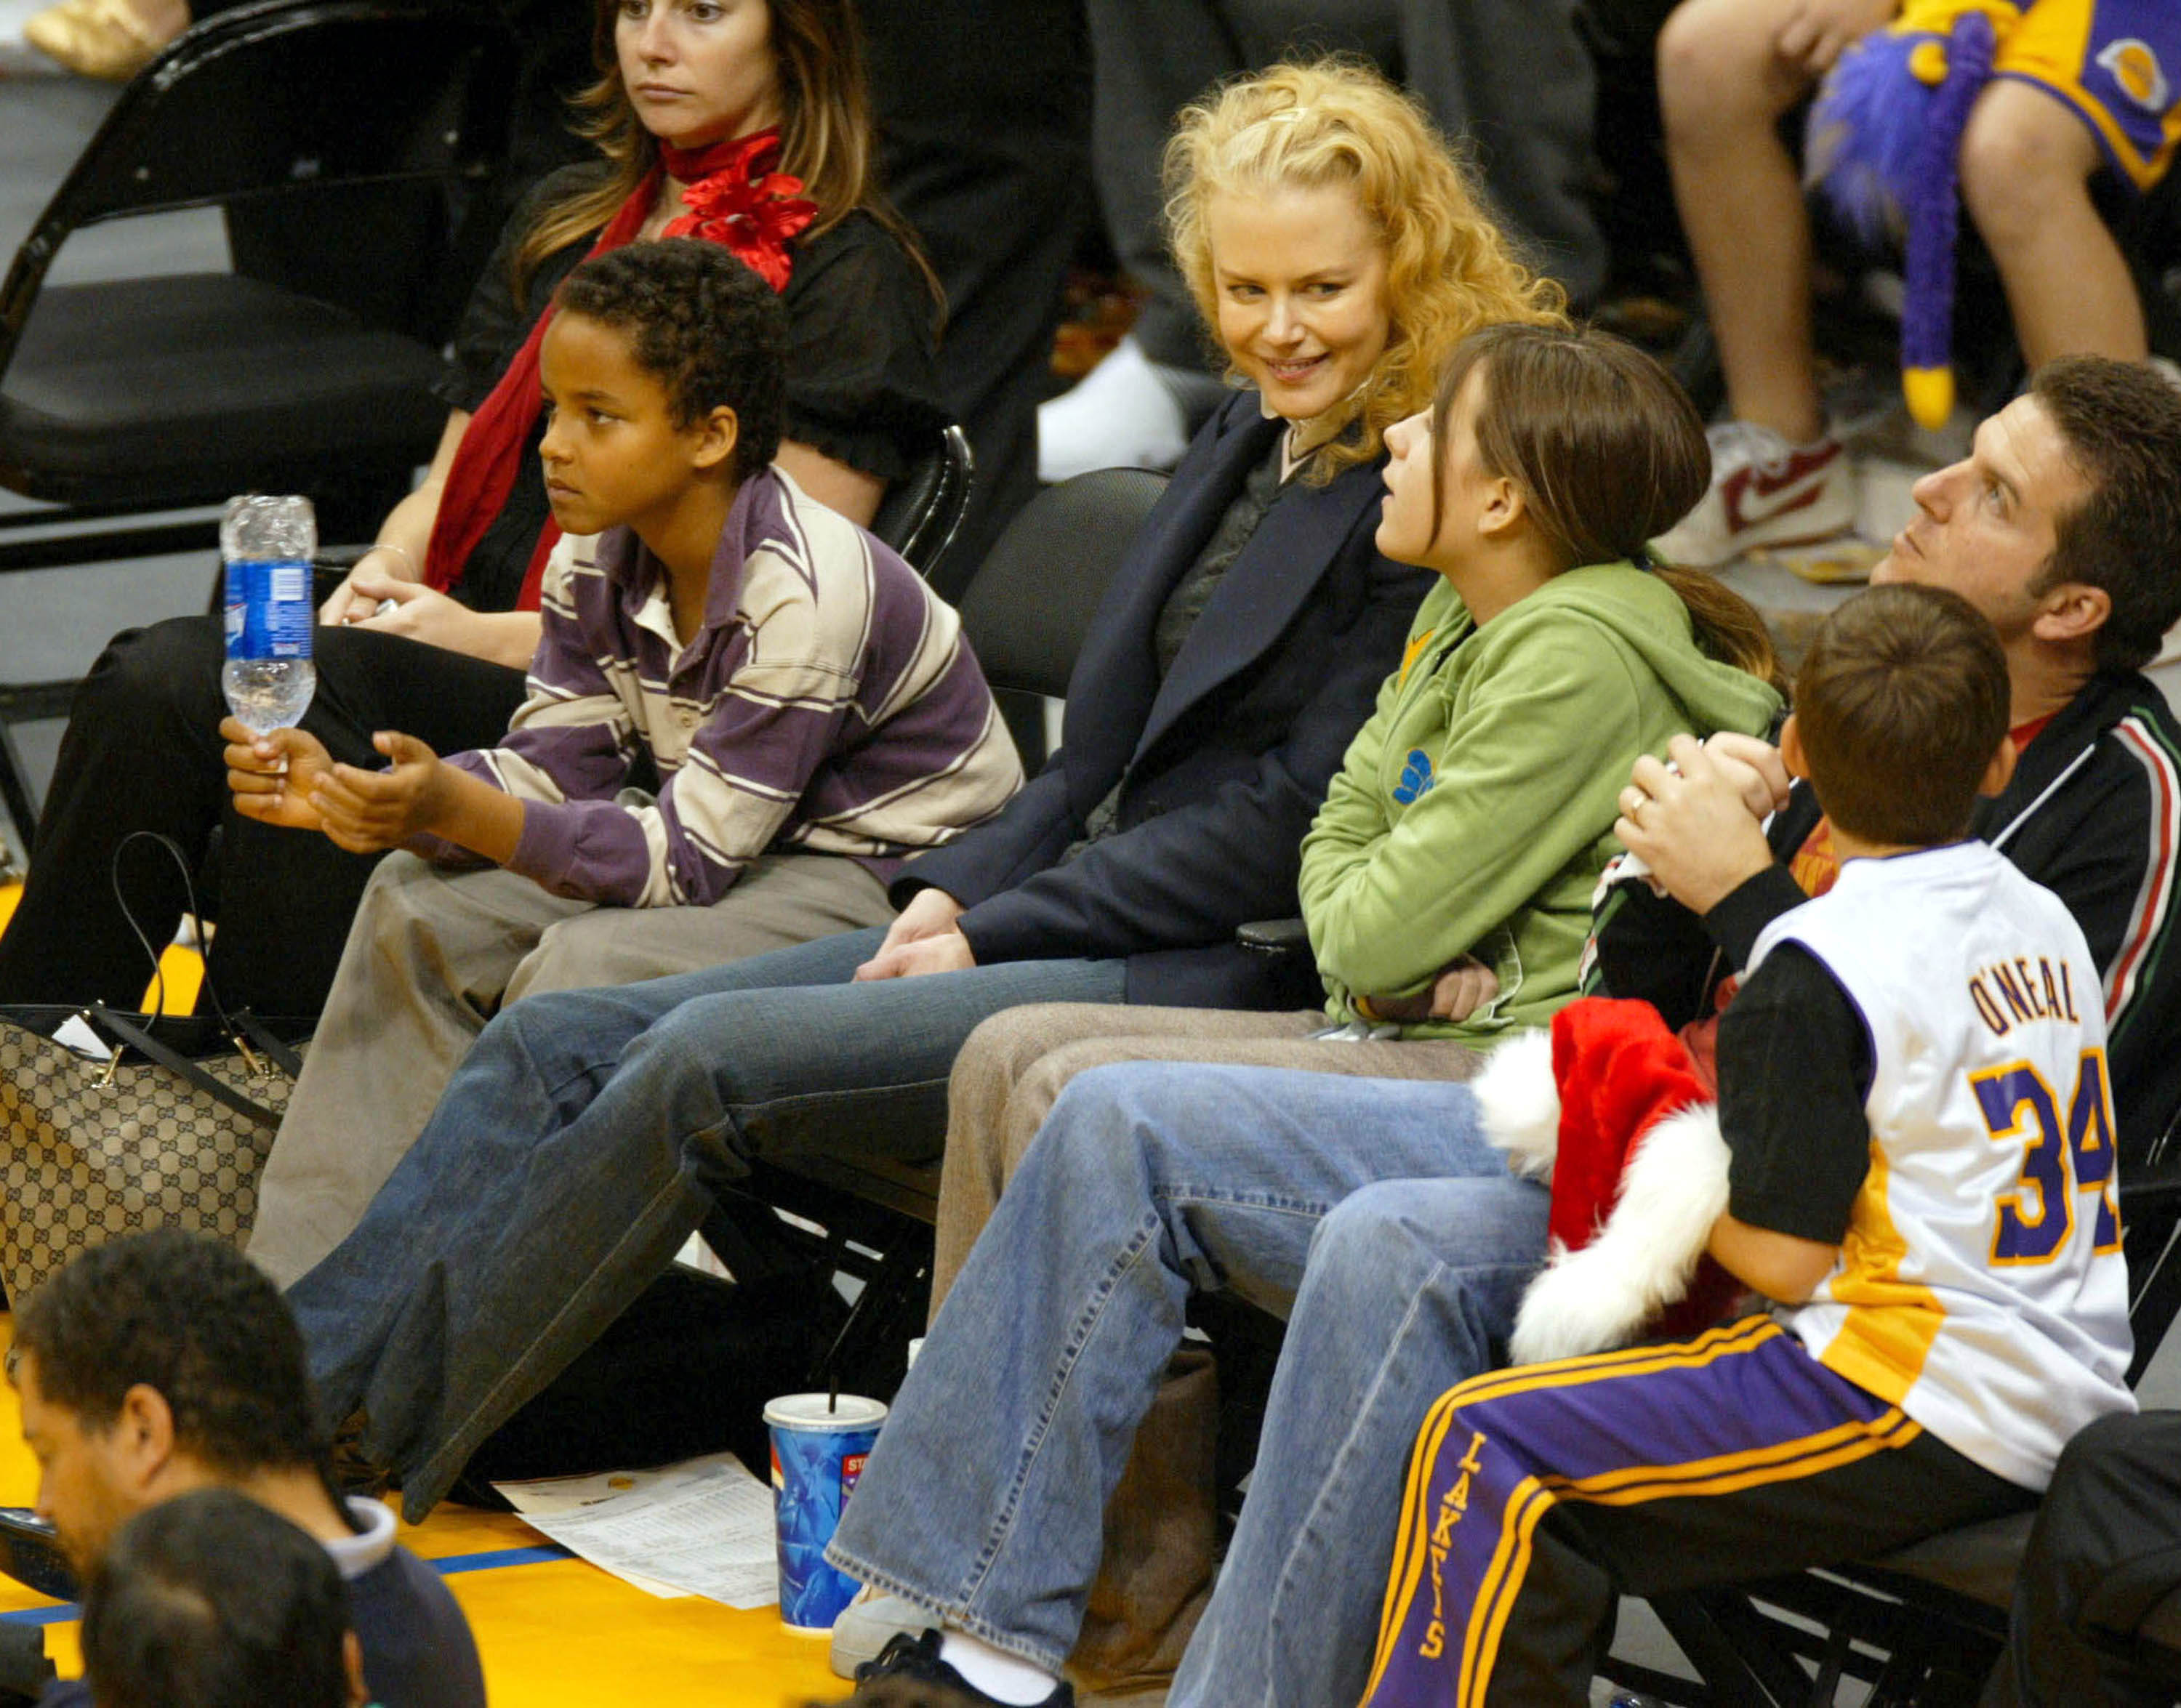 Nicole Kidman and her children Bella and Connor Cruise watching a game between the Los Angeles Lakers and the Miami Heat at the Staples Center in 2004 | Source: Getty Images